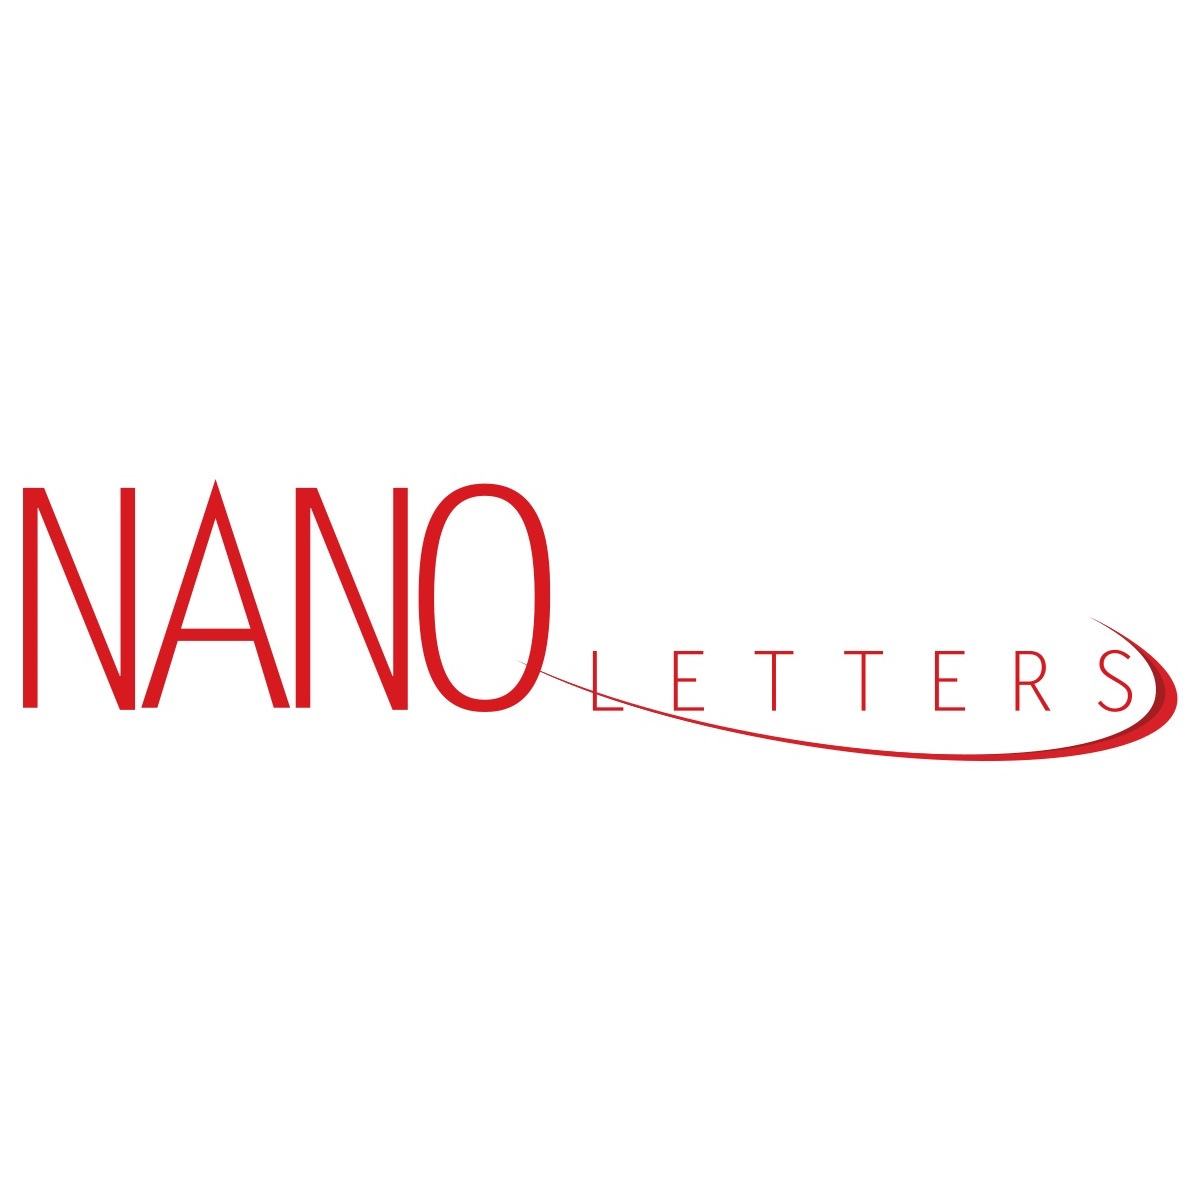 New Publication on Nano Letters